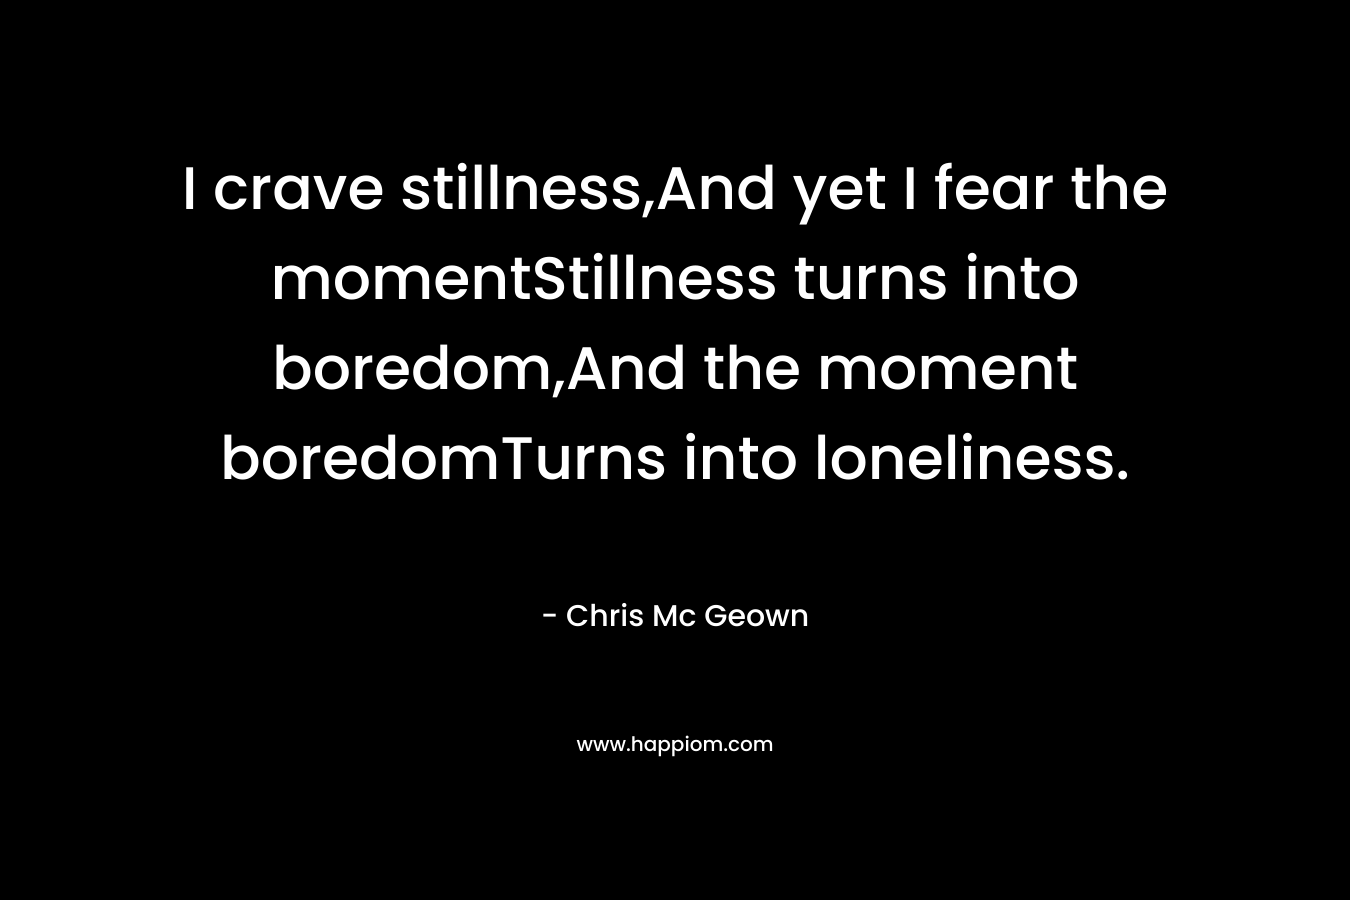 I crave stillness,And yet I fear the momentStillness turns into boredom,And the moment boredomTurns into loneliness. – Chris Mc Geown